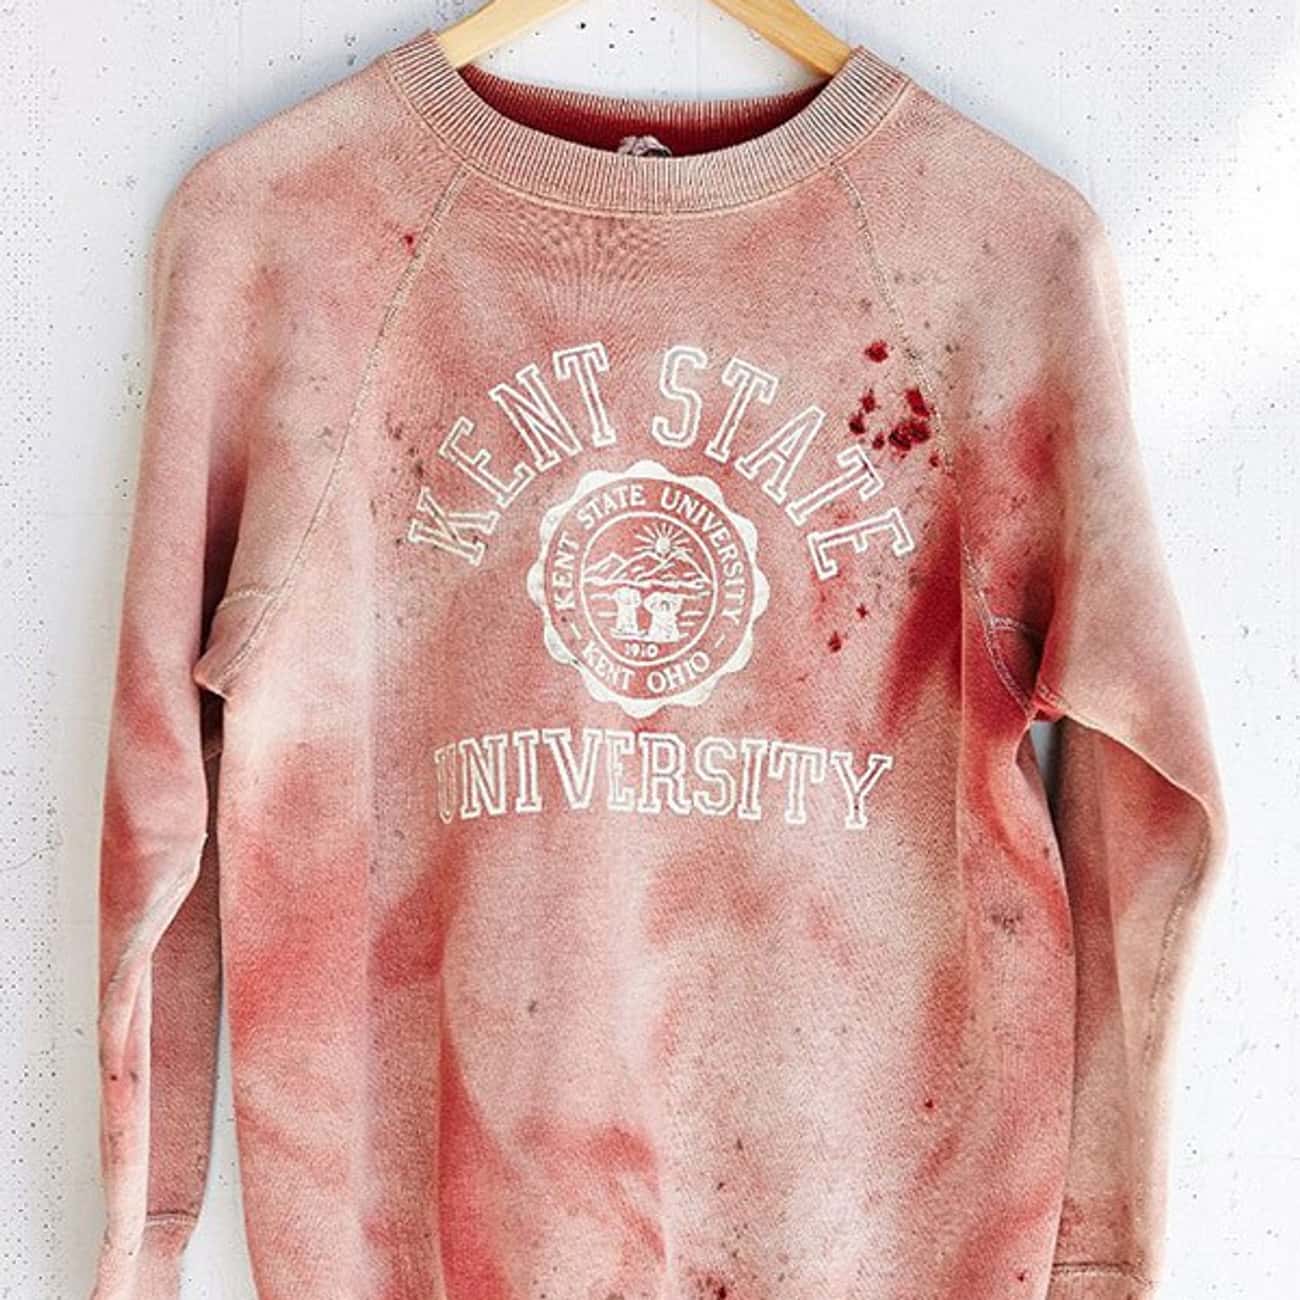 A Seemingly Bloodstained Kent State Sweatshirt